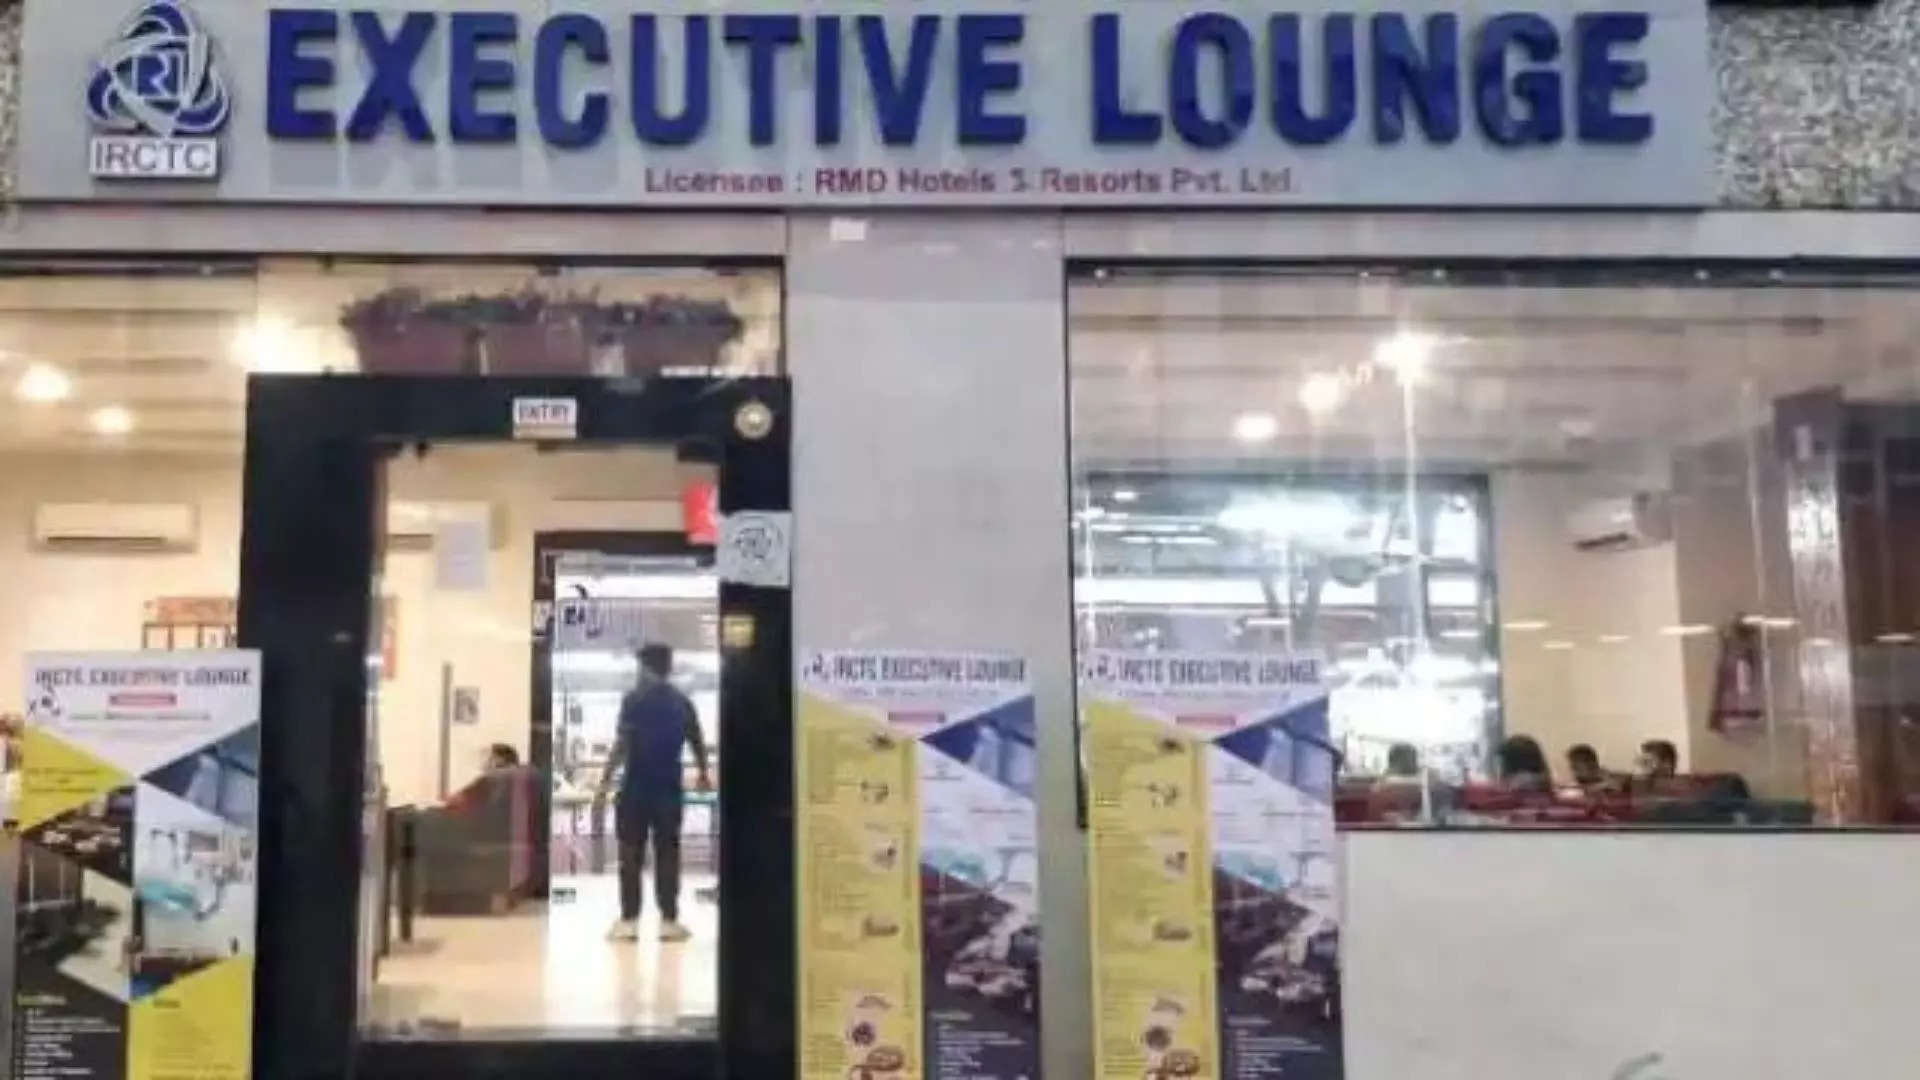 Tourists charged Rs 224 for using the washroom at the IRCTC Executive Lounge in Agra | Representative image courtesy of IRCTC